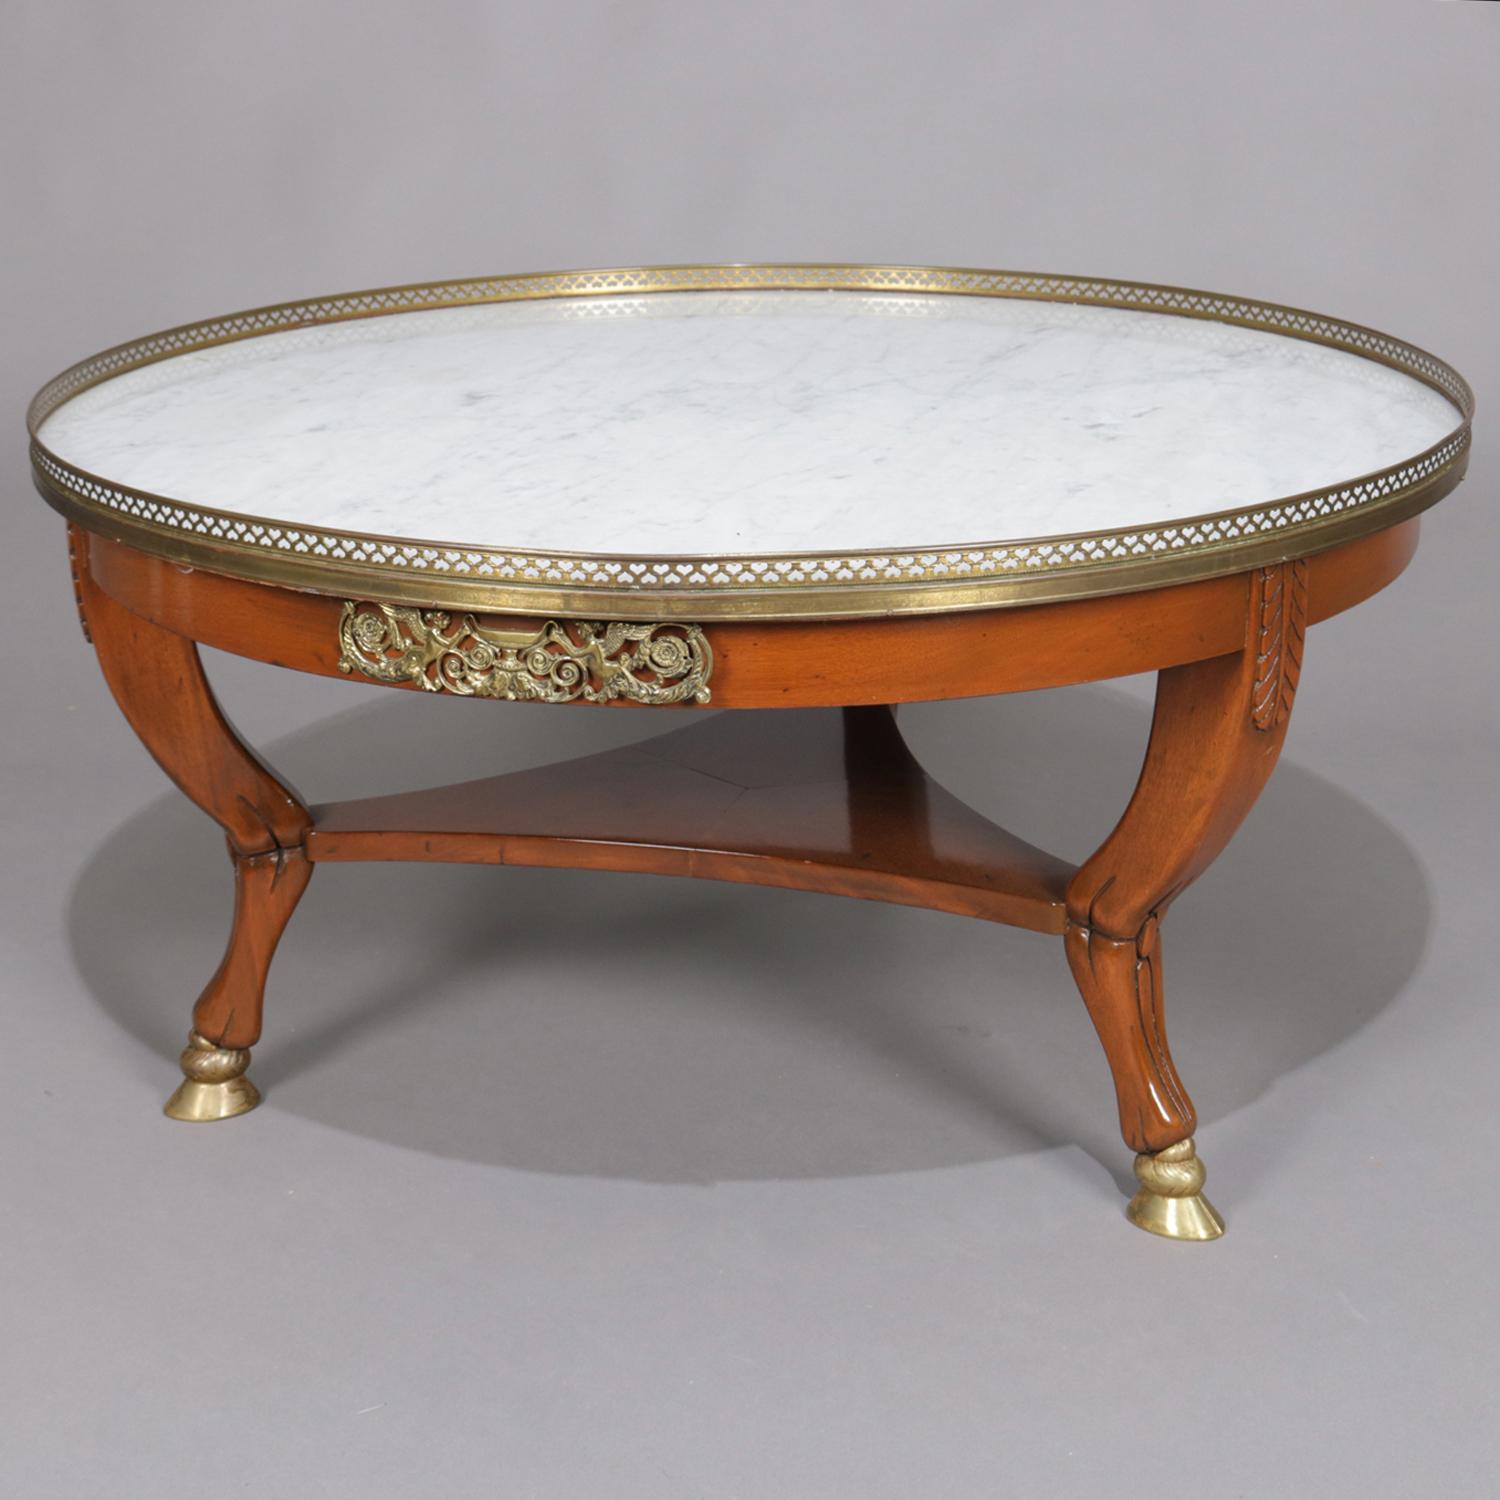 Bronze French Neoclassical Carved Mahogany, Ormolu and Marble Coffee Table, circa 1930